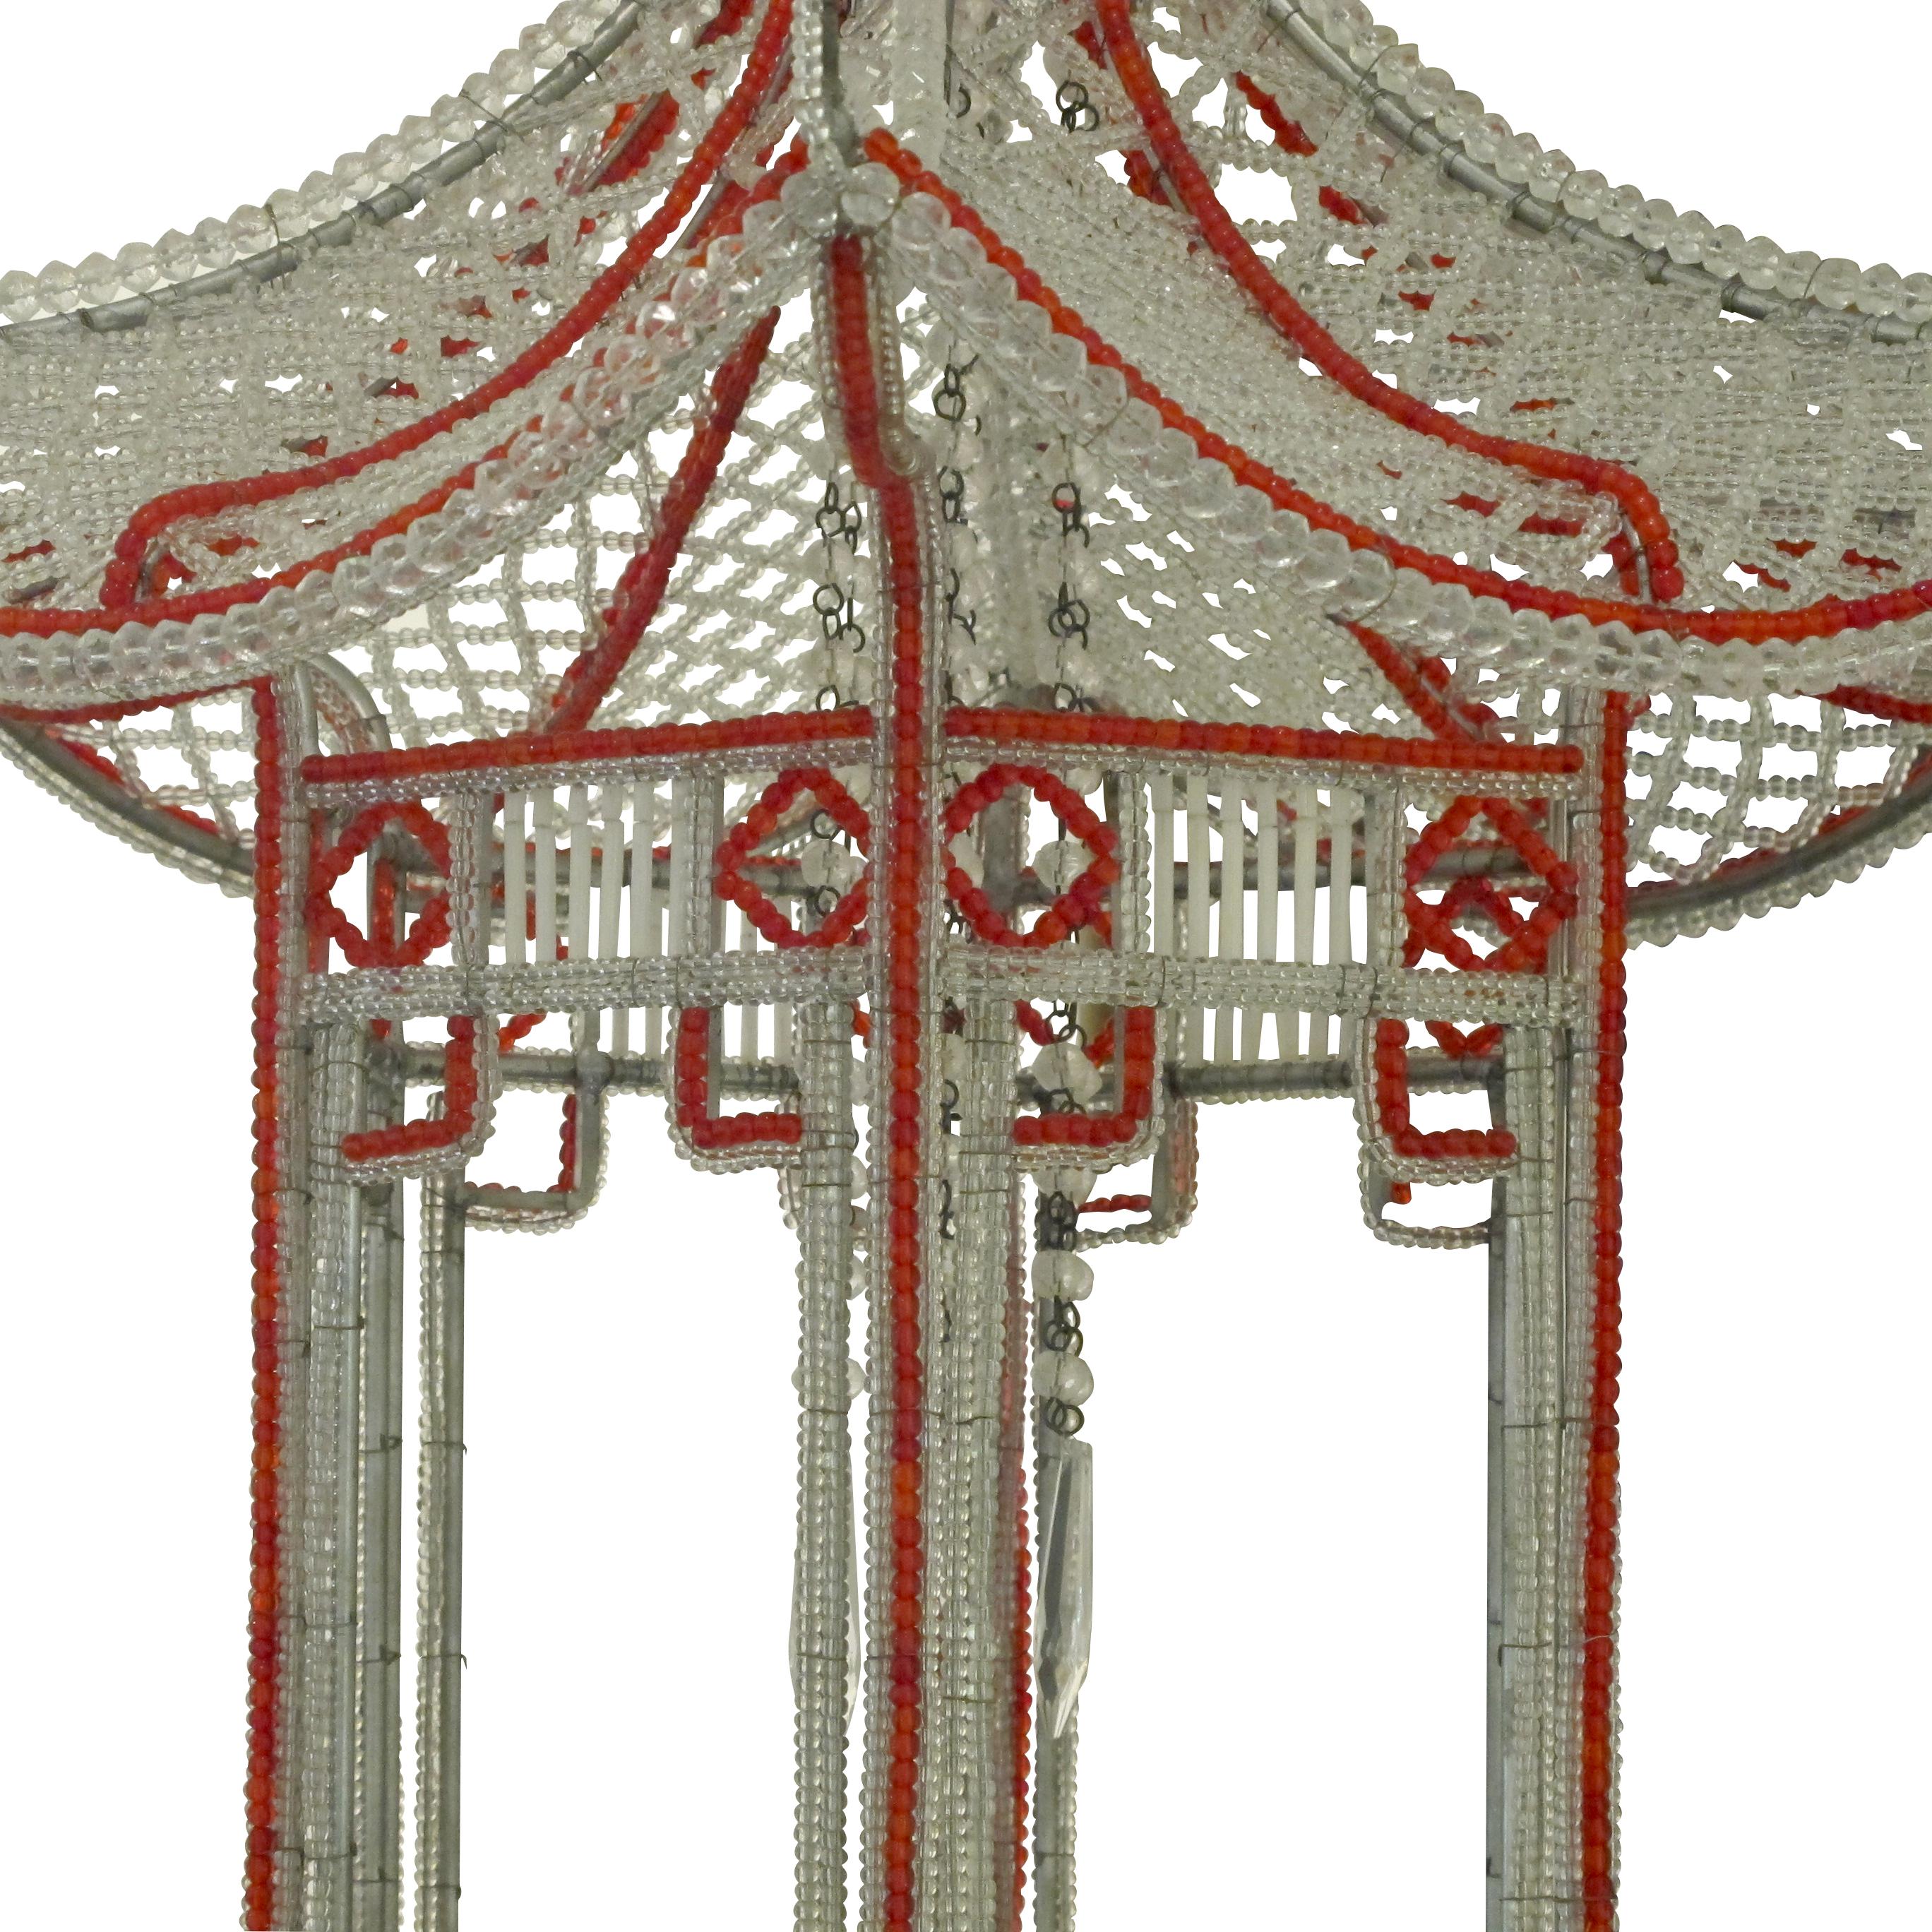 1990s Italian handcrafted beaded pagoda chandelier with clear and red glass beads. This is an exceptional and very well-made chandelier in the shape of a pagoda in the Venetian style. The centre of the chandelier holds long strings of beaded chains